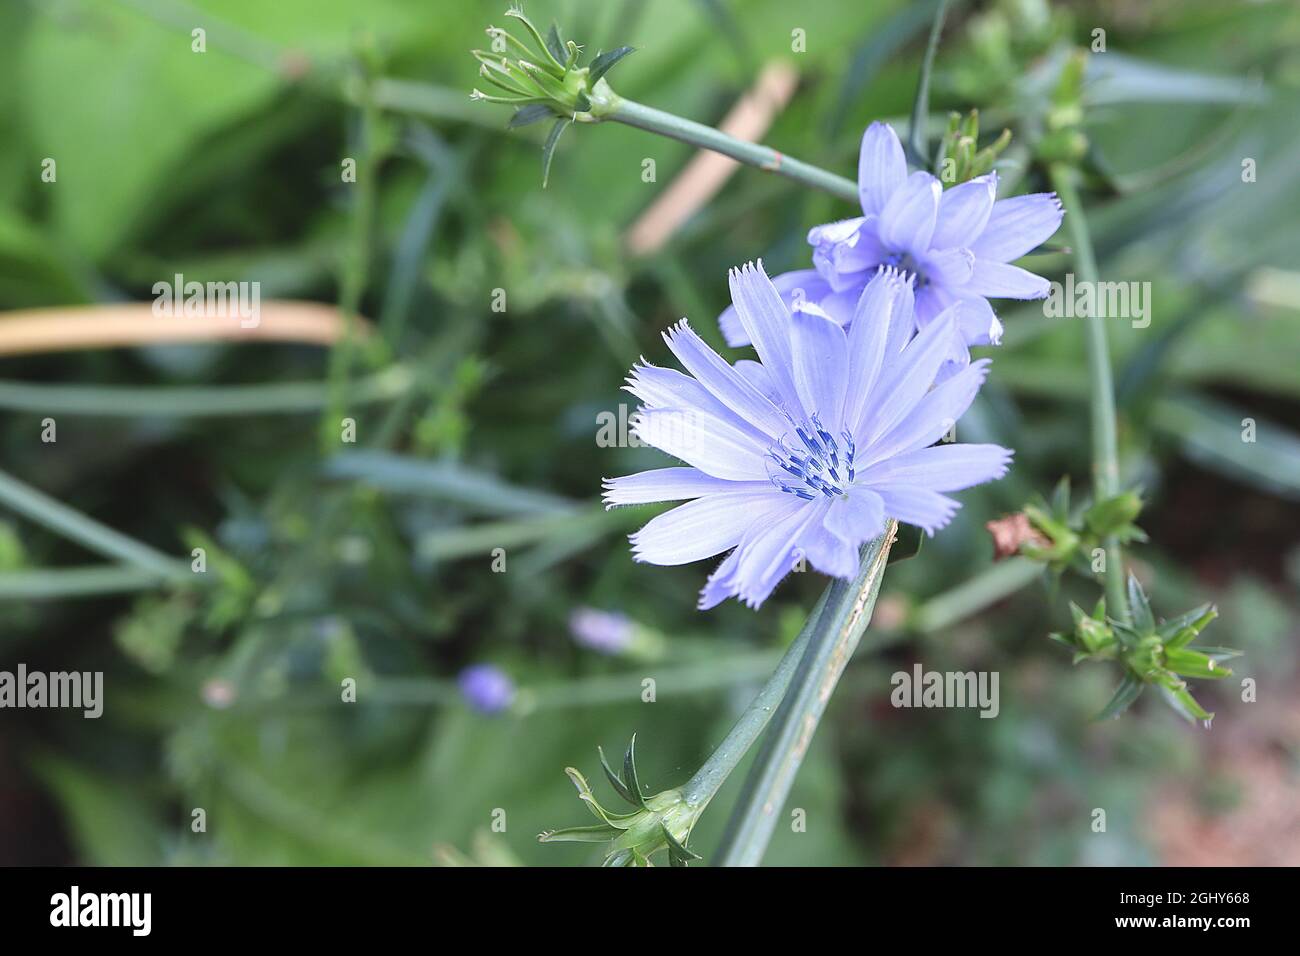 Cichorium intybus ‘Electric Blue’ chicory Electric Blue – lavender blue flowers with paintbrush-like petals on long stems, August, England, UK Stock Photo